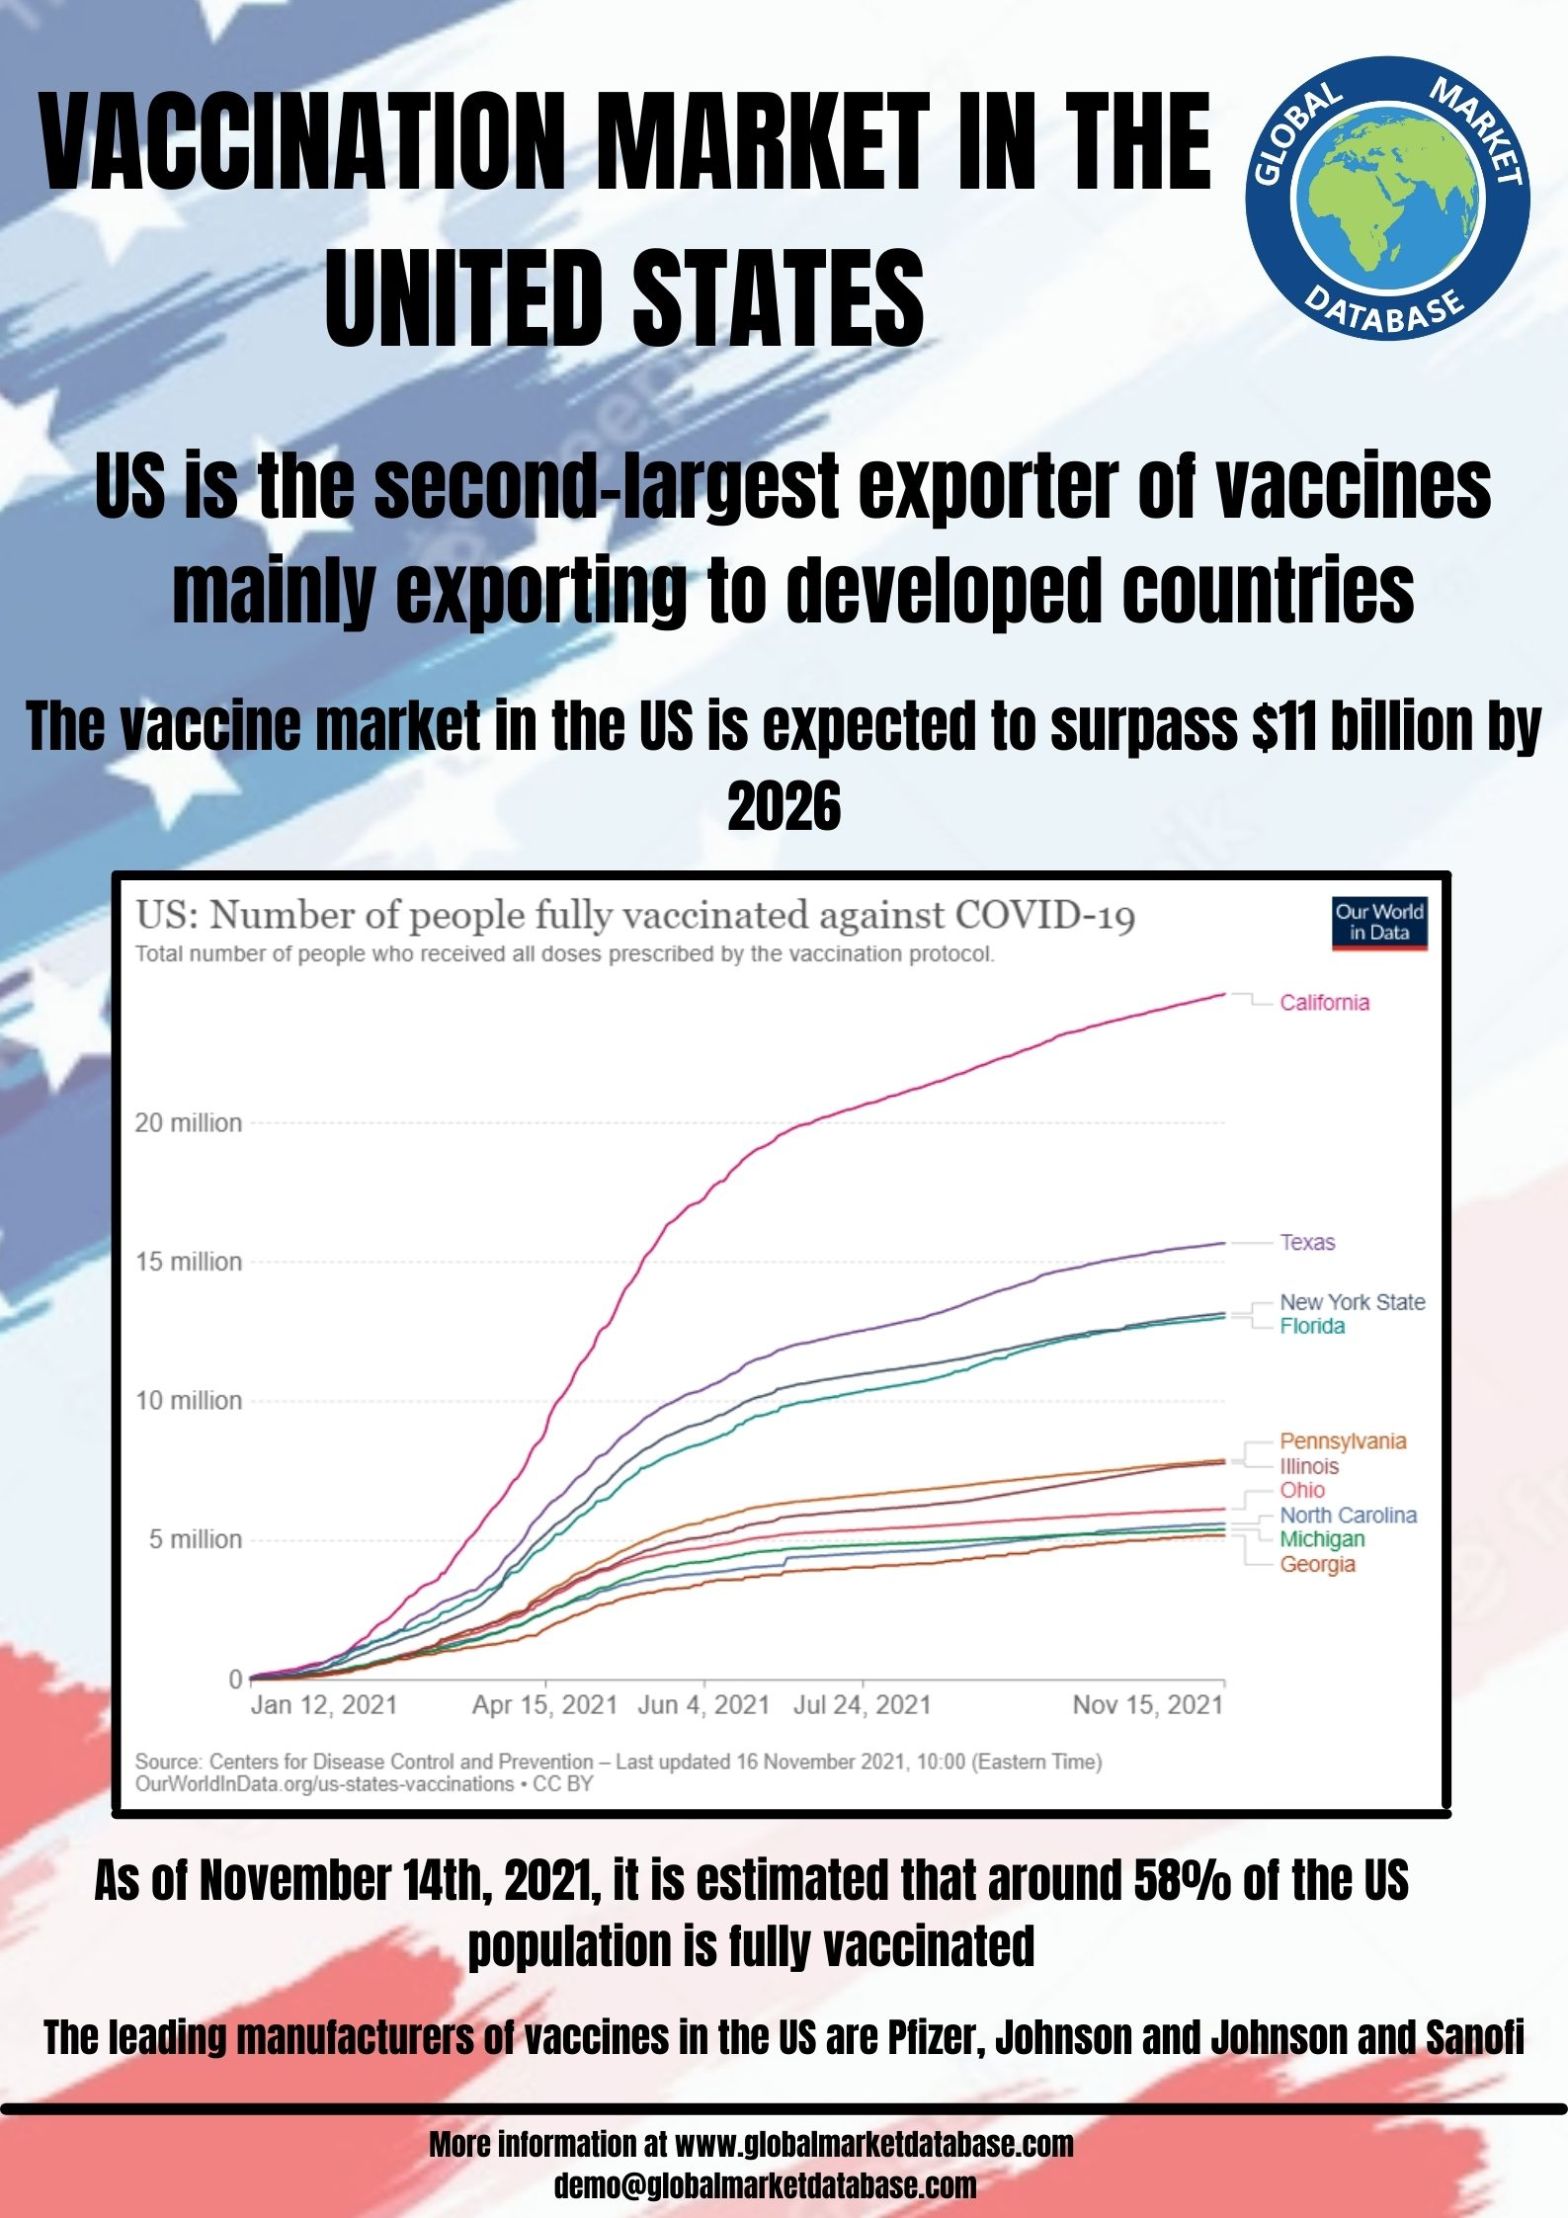 Fully vaccinated population in US